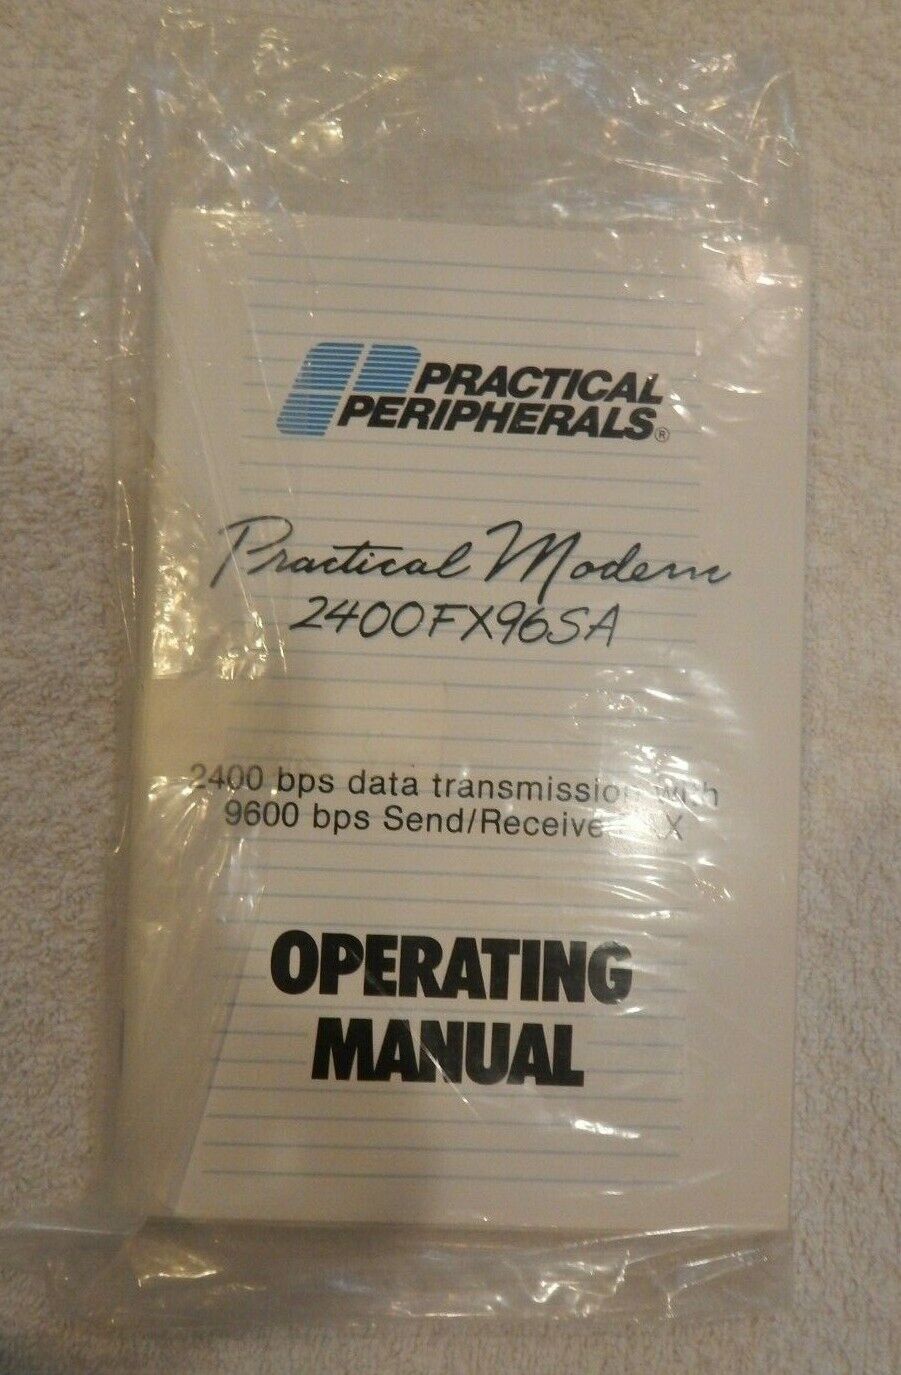 VINTAGE NEW Practical Peripherals Modem 2400FX96 User\'s Guide & Software Manuals